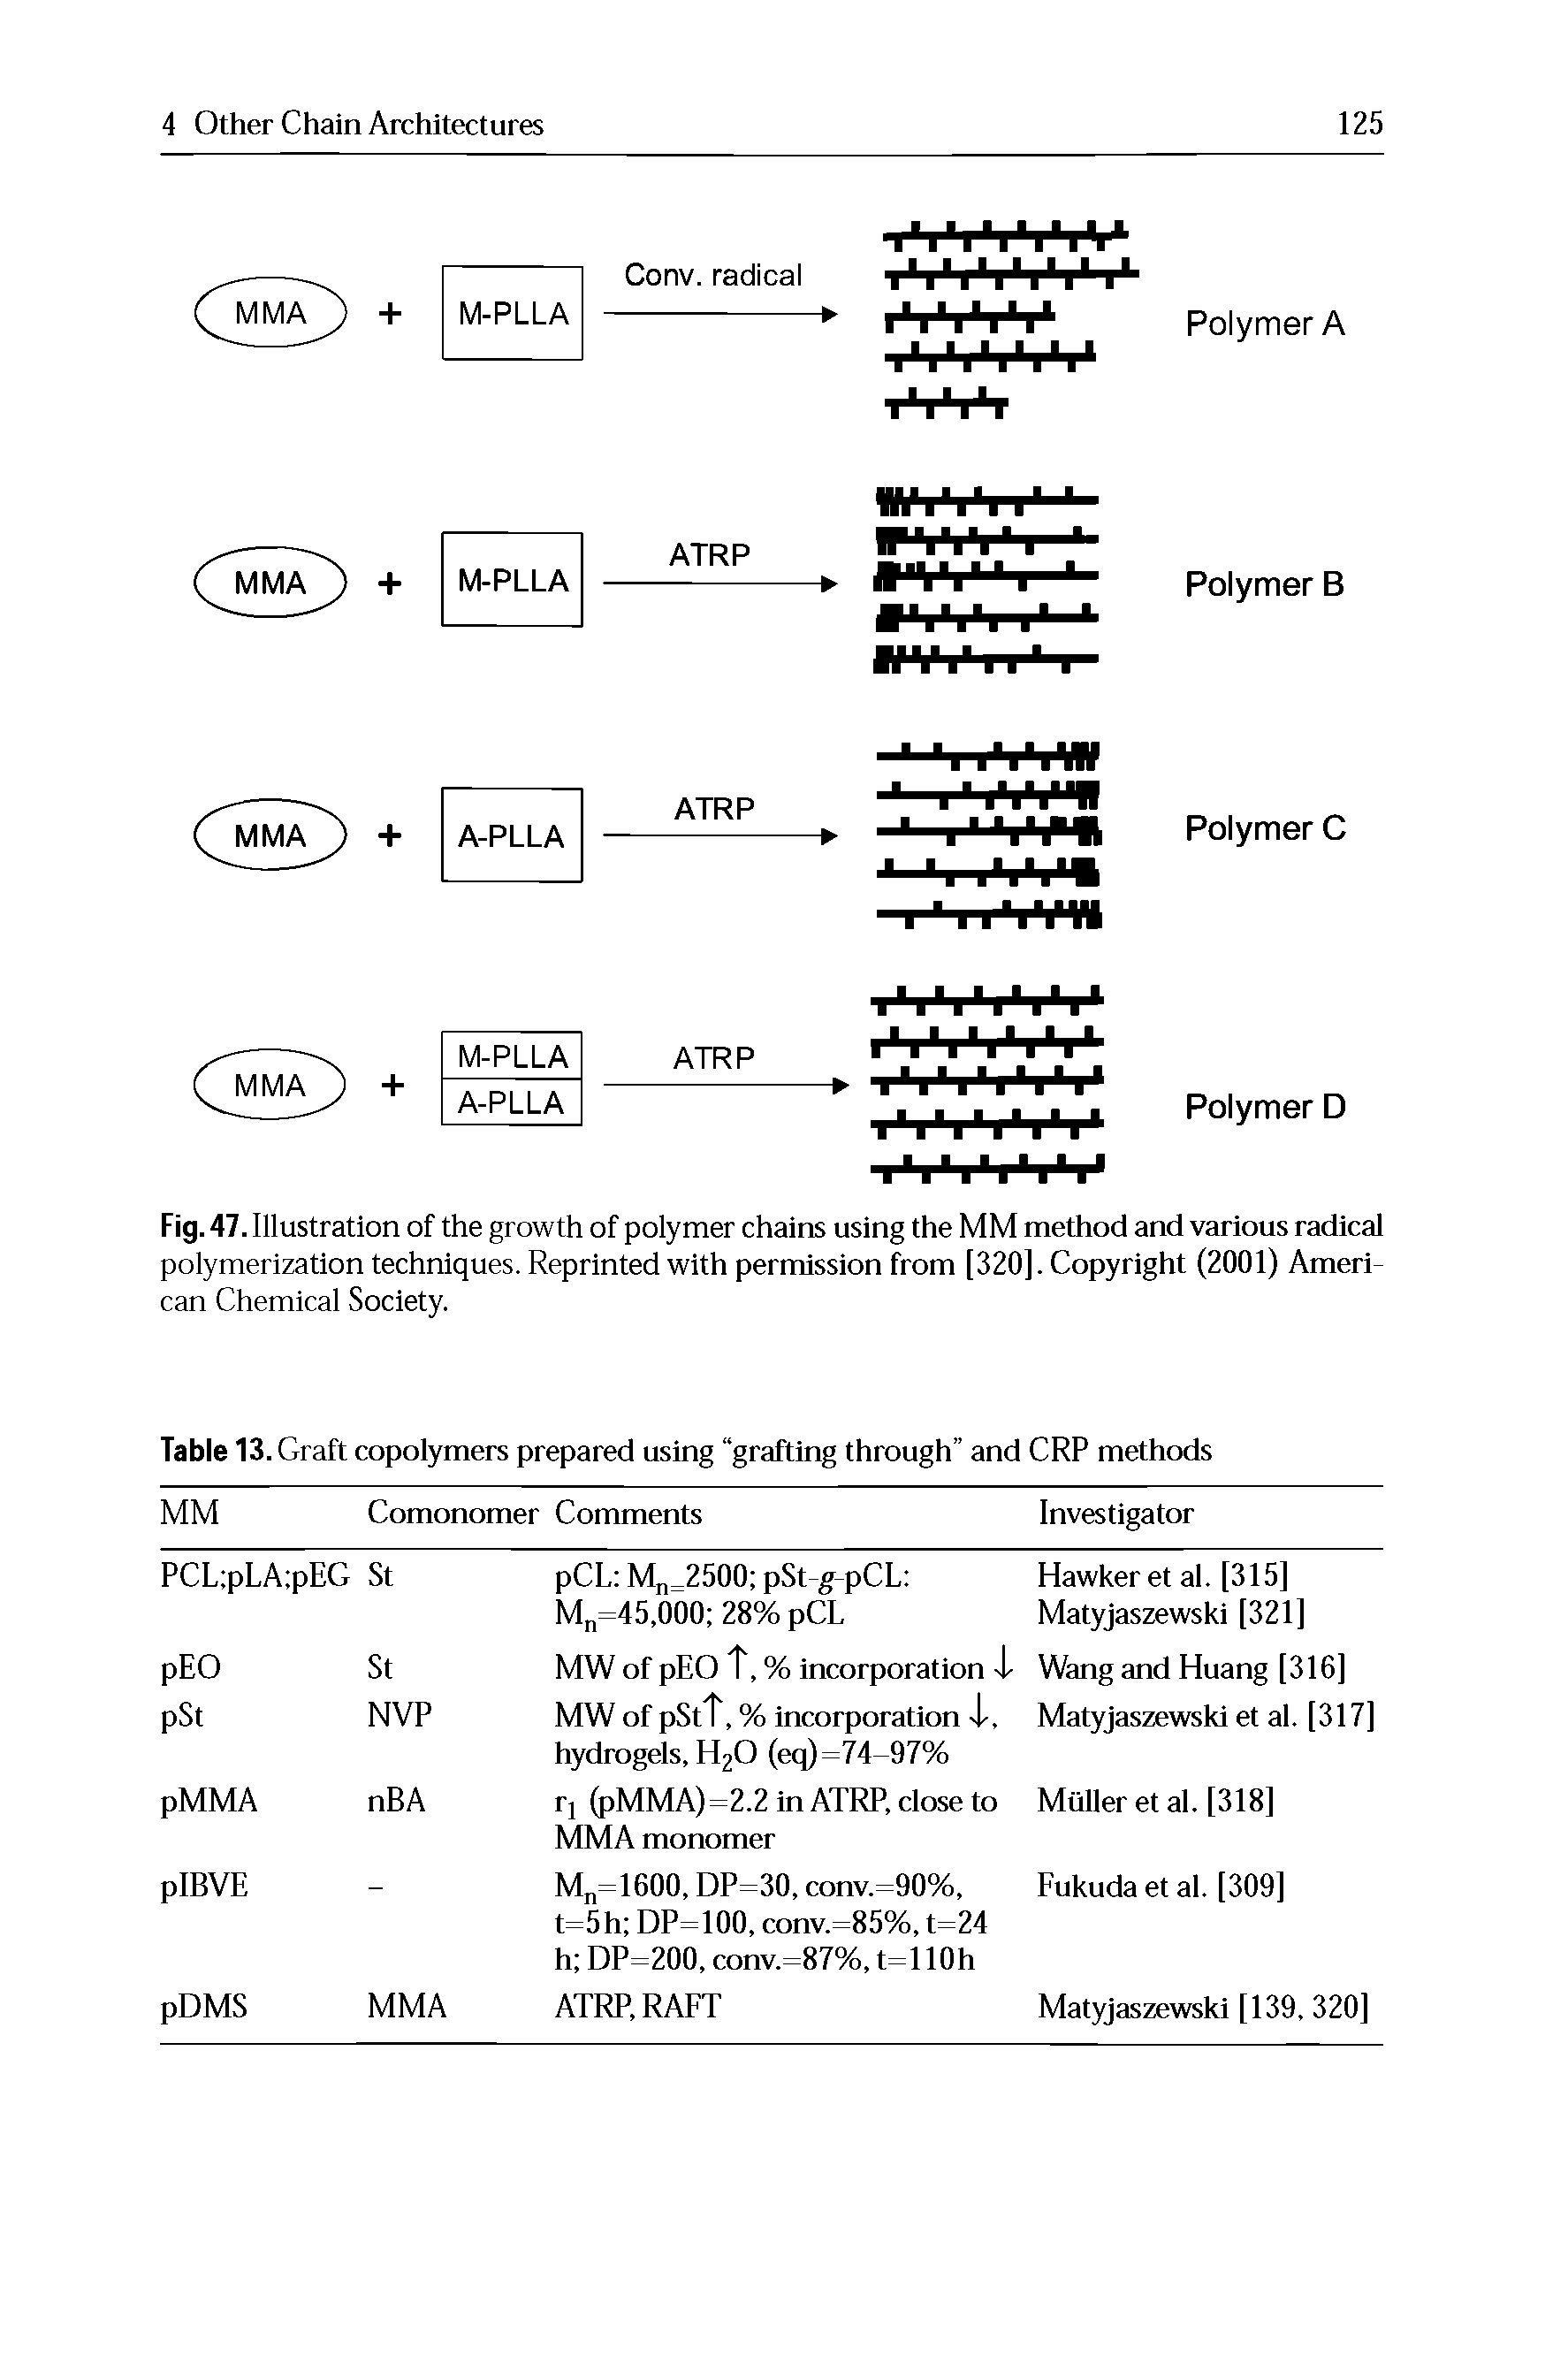 Fig. 47. Illustration of the growth of polymer chains using the MM method and various radical polymerization techniques. Reprinted with permission from [320]. Copyright (2001) American Chemical Society.